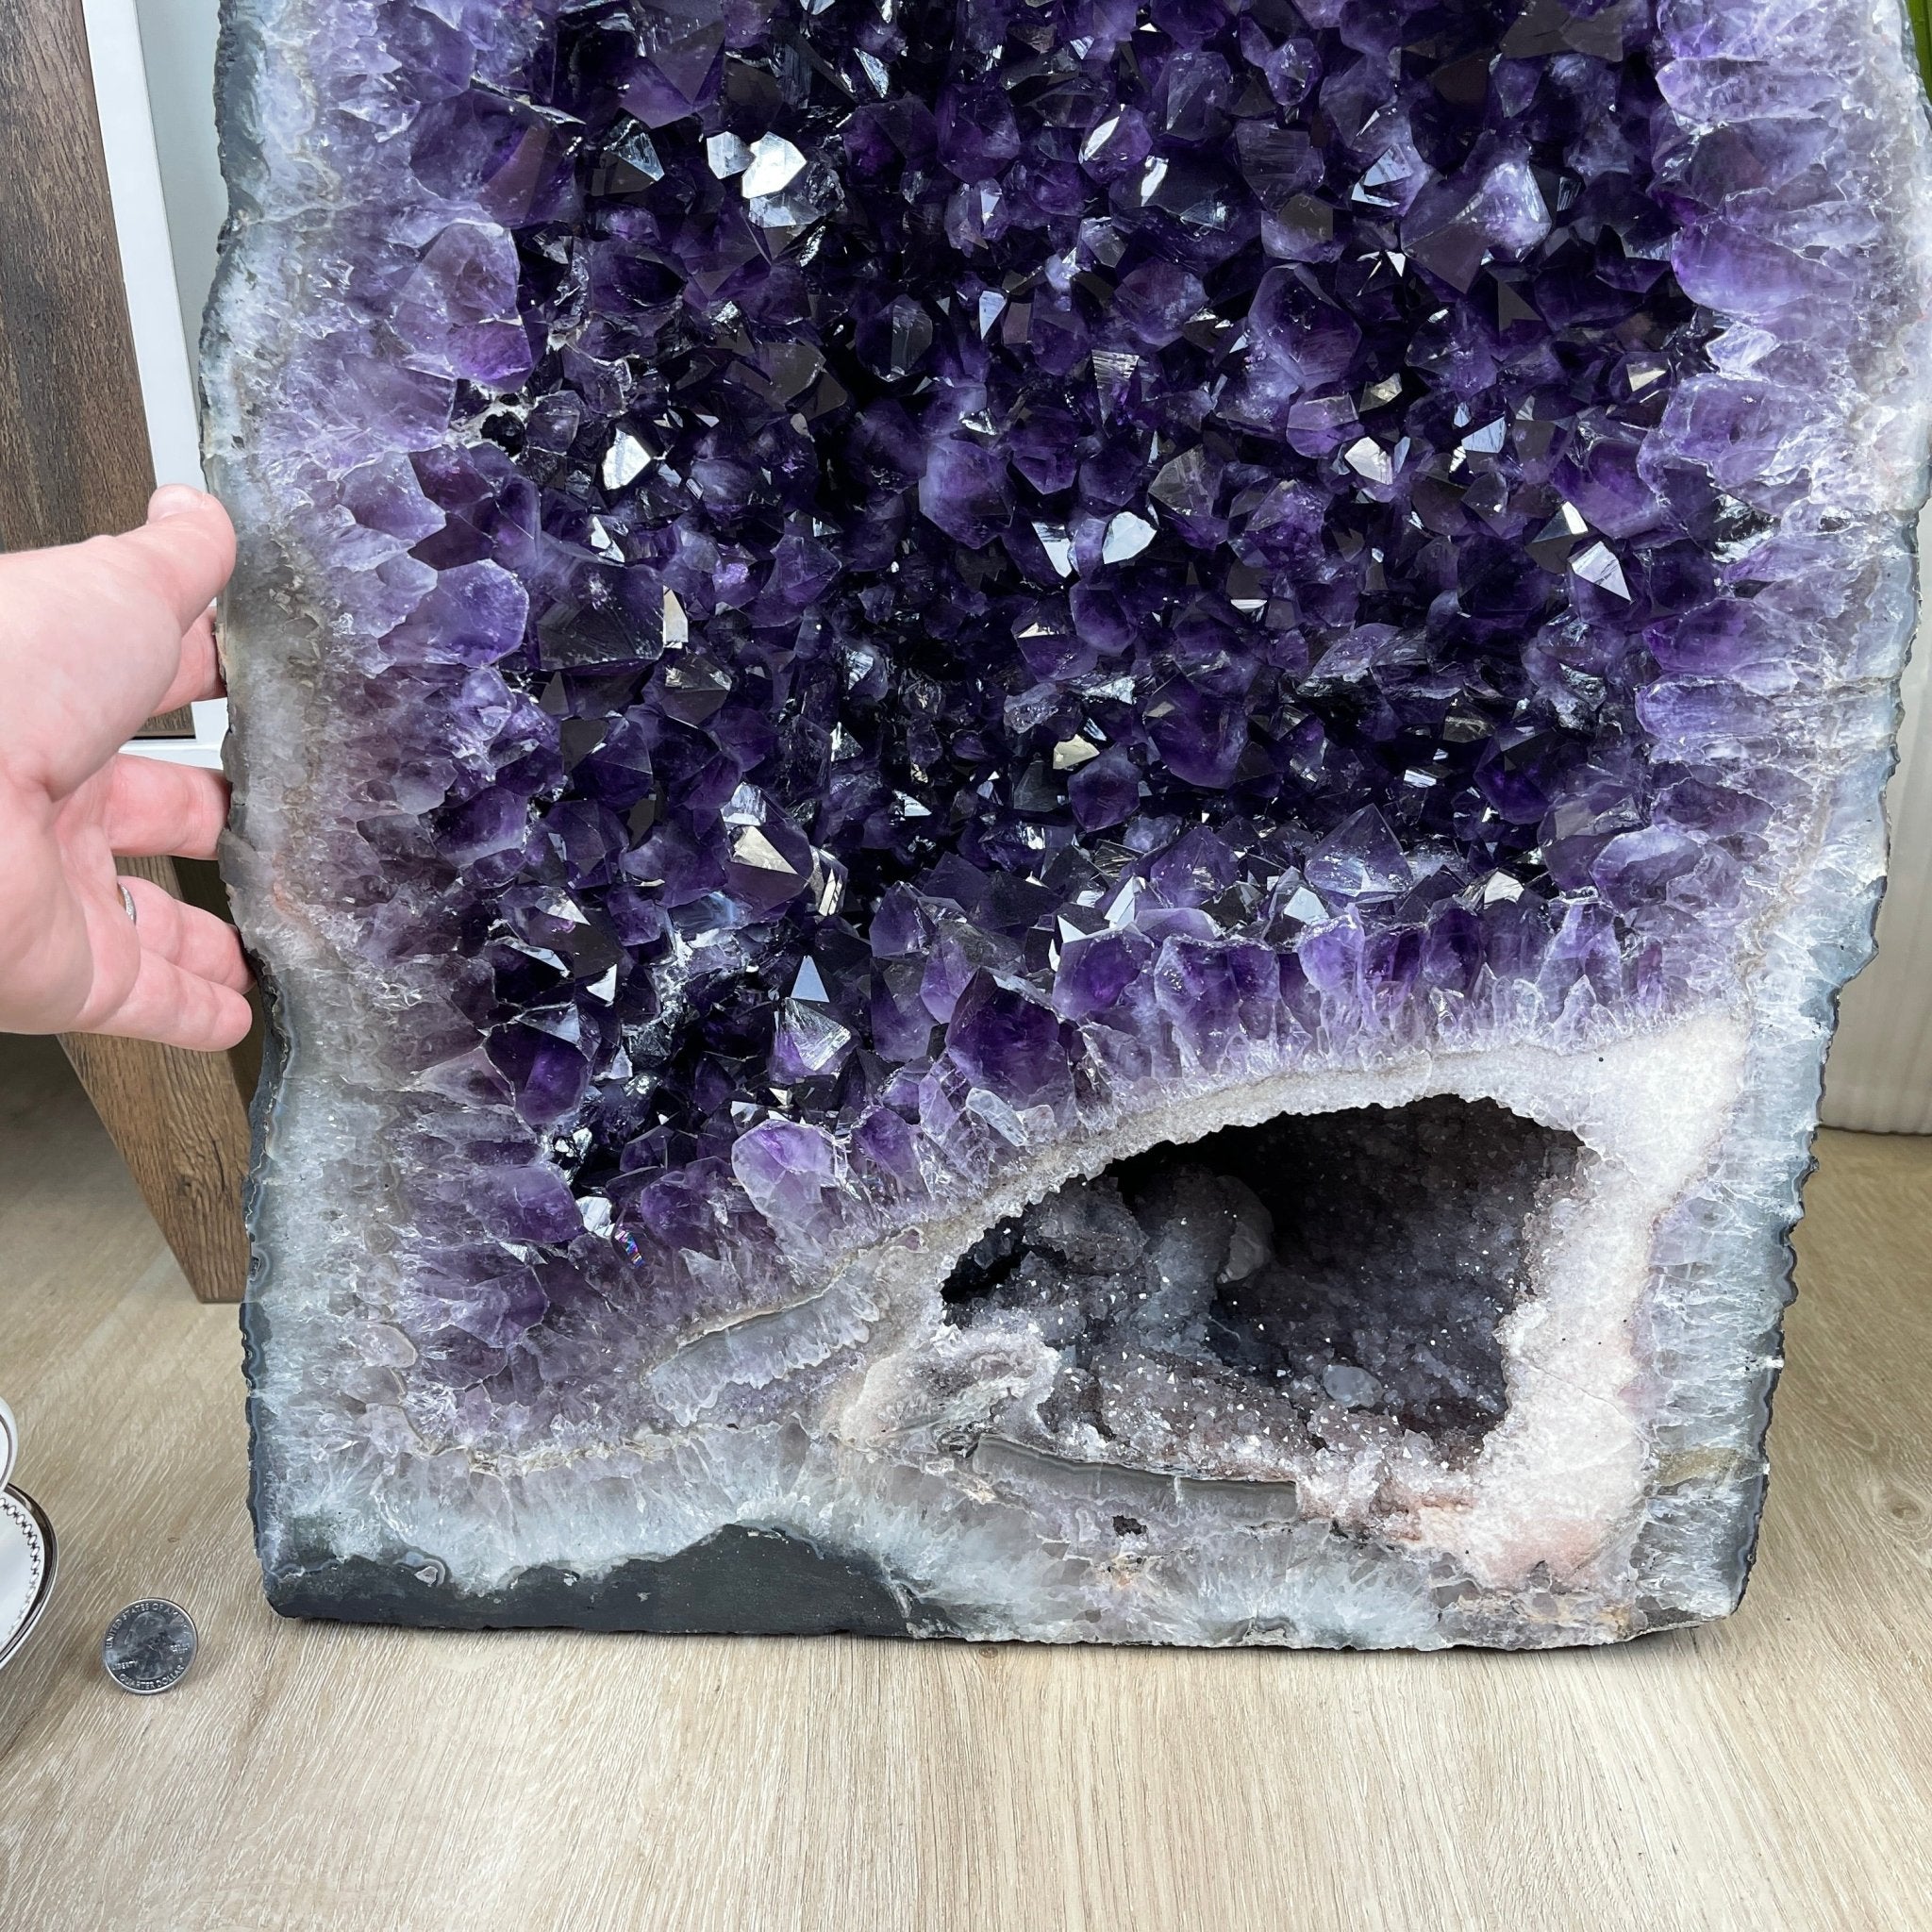 Large Extra Plus Quality Brazilian Amethyst Cathedral, 28” tall & 164.3 lbs #5601-0529 by Brazil Gems - Brazil GemsBrazil GemsLarge Extra Plus Quality Brazilian Amethyst Cathedral, 28” tall & 164.3 lbs #5601-0529 by Brazil GemsCathedrals5601-0529